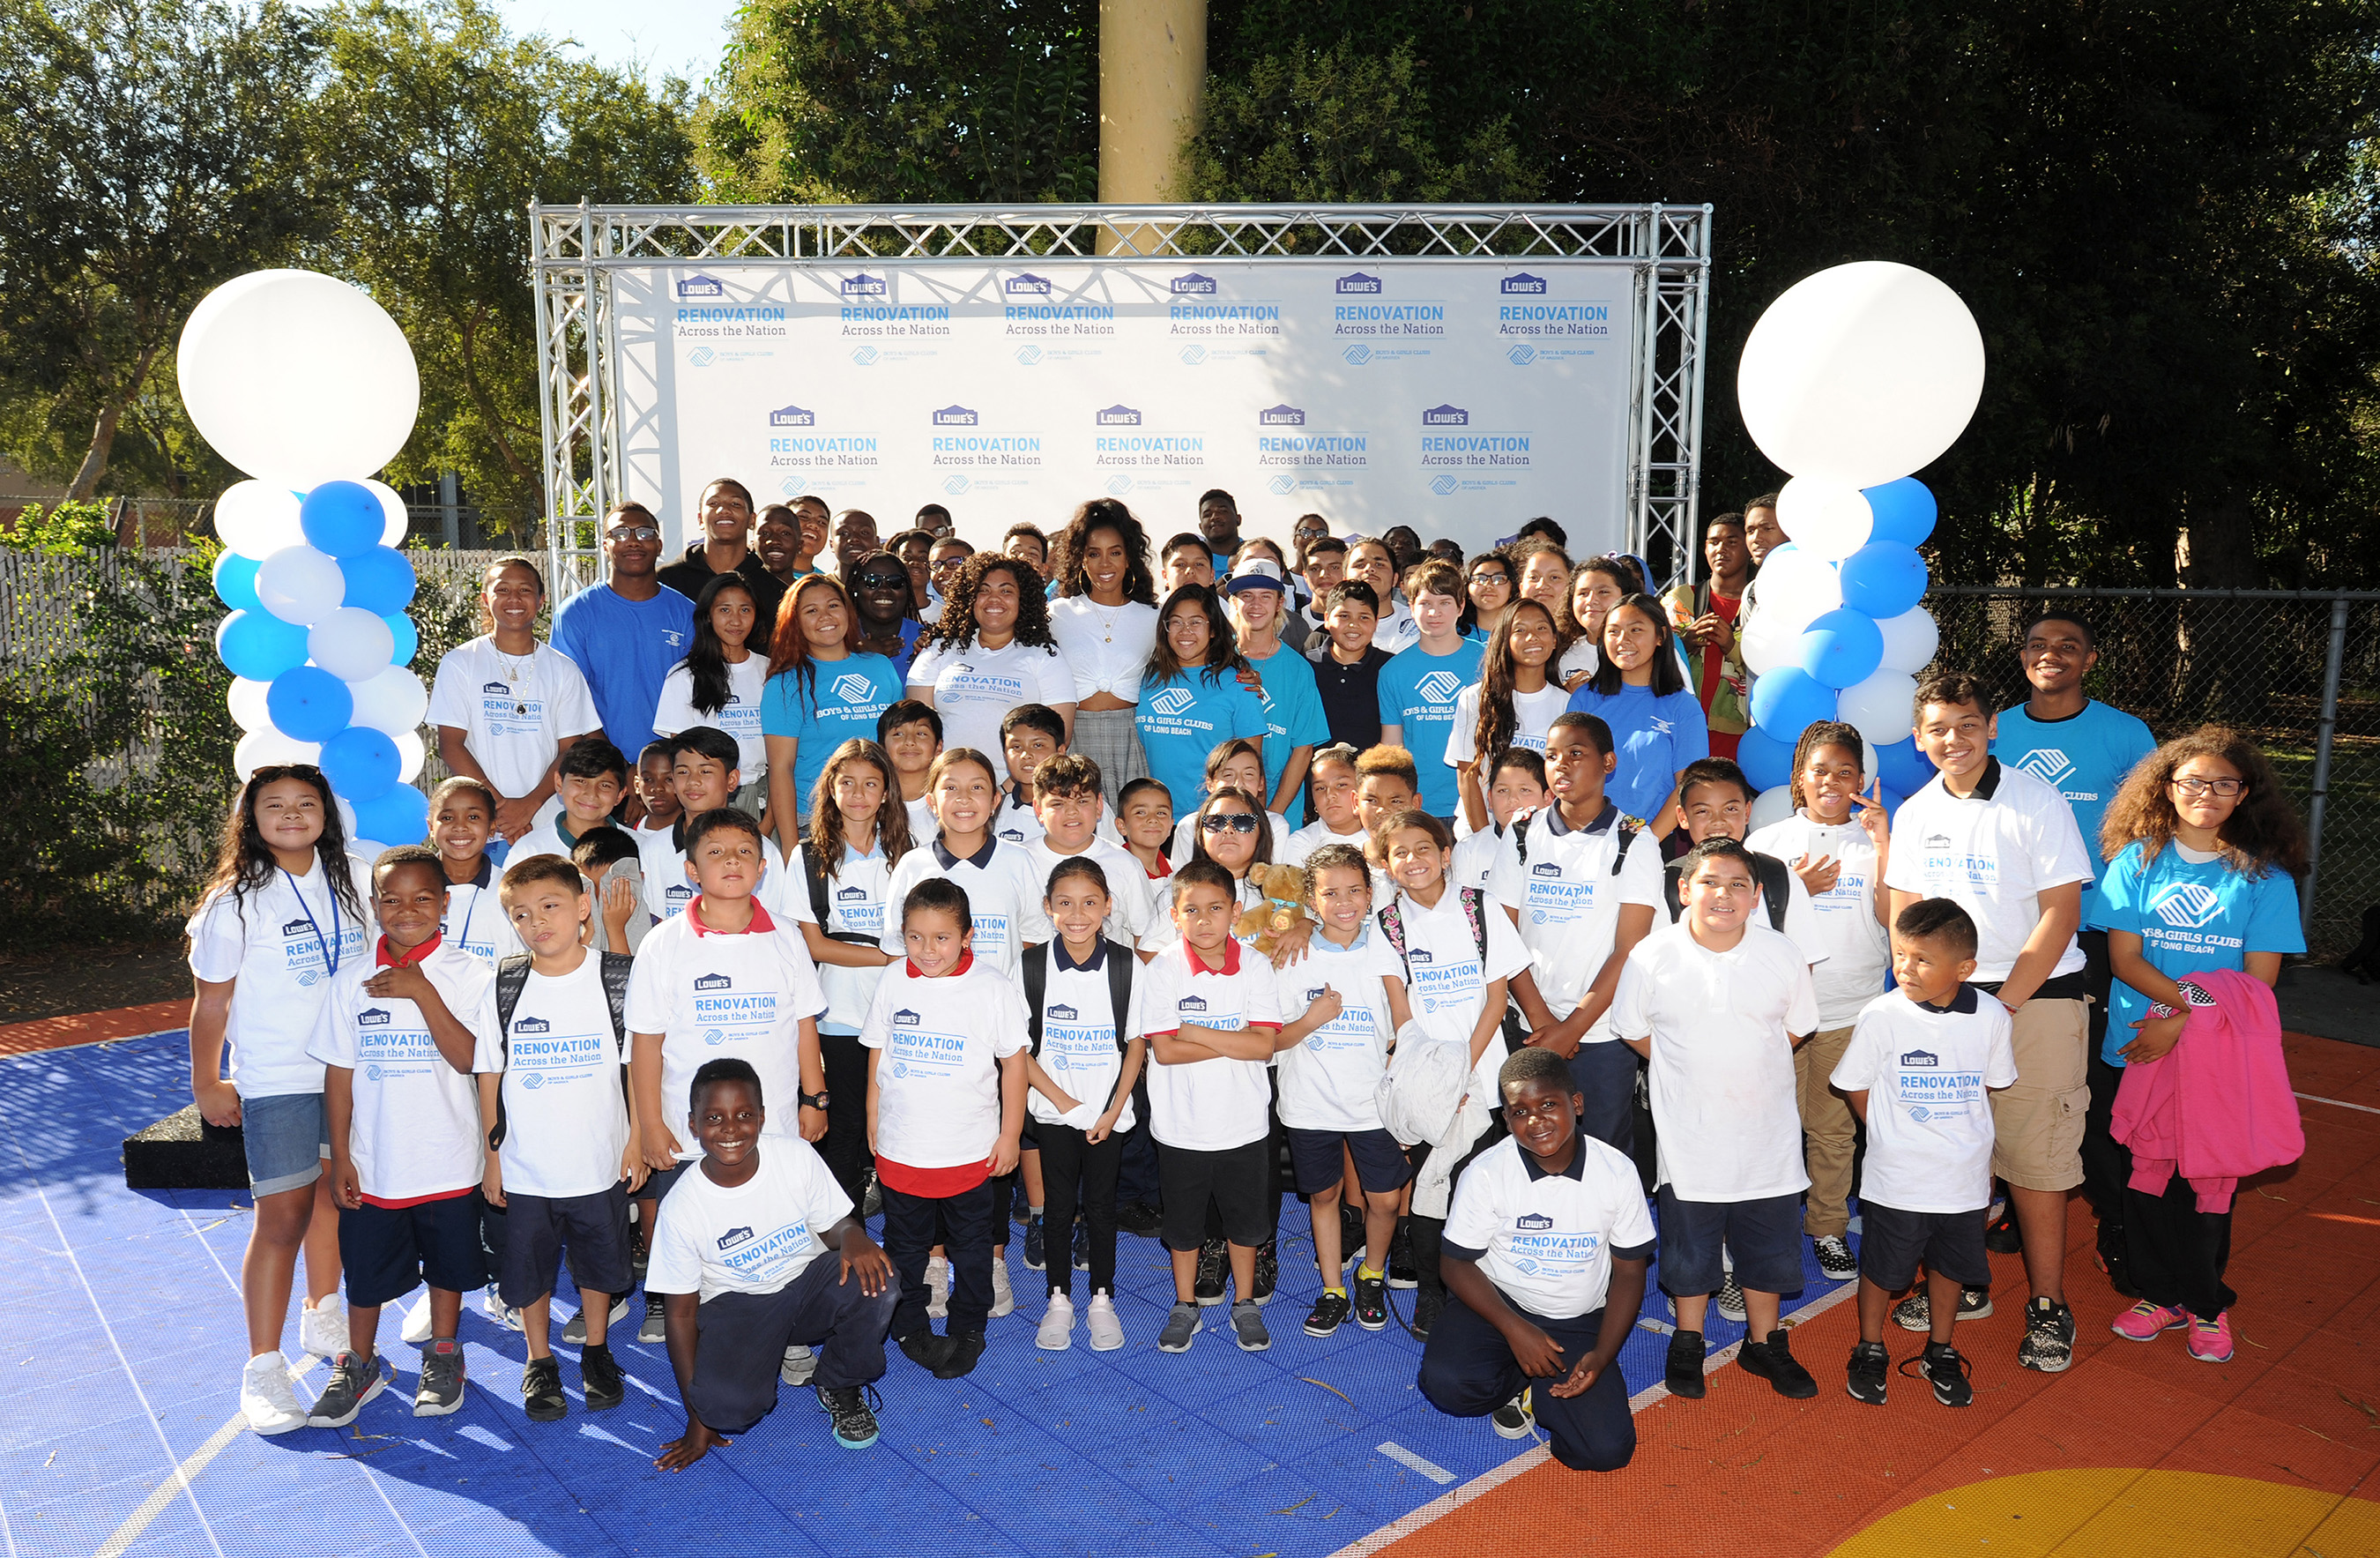 R&B singer Kelly Rowland joined Long Beach Boys & Girls Club members for a group photo.